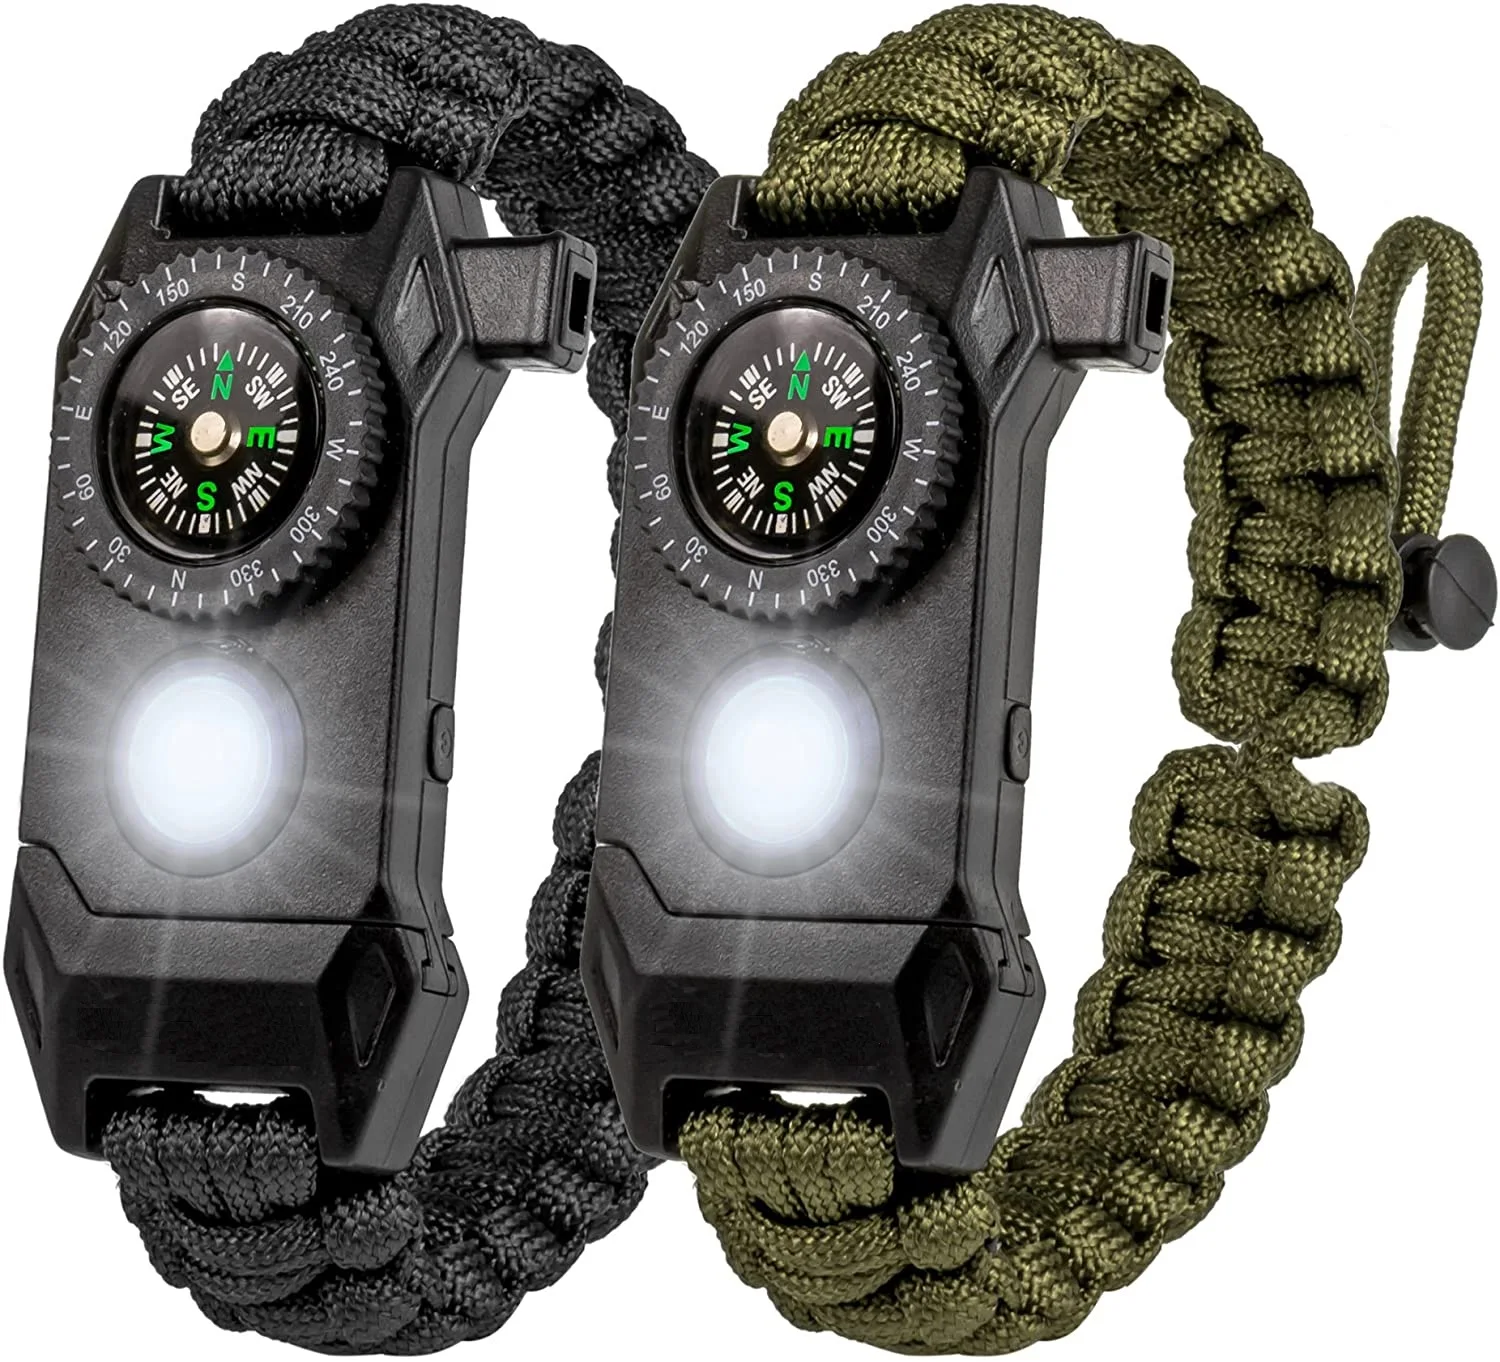 

Energinox 6 In 1 Adjustable Mens Outdoor Survival Tactical Paracord Bracelet With SOS Led Light Compass Fire Starter Whistle, Green, black and etc